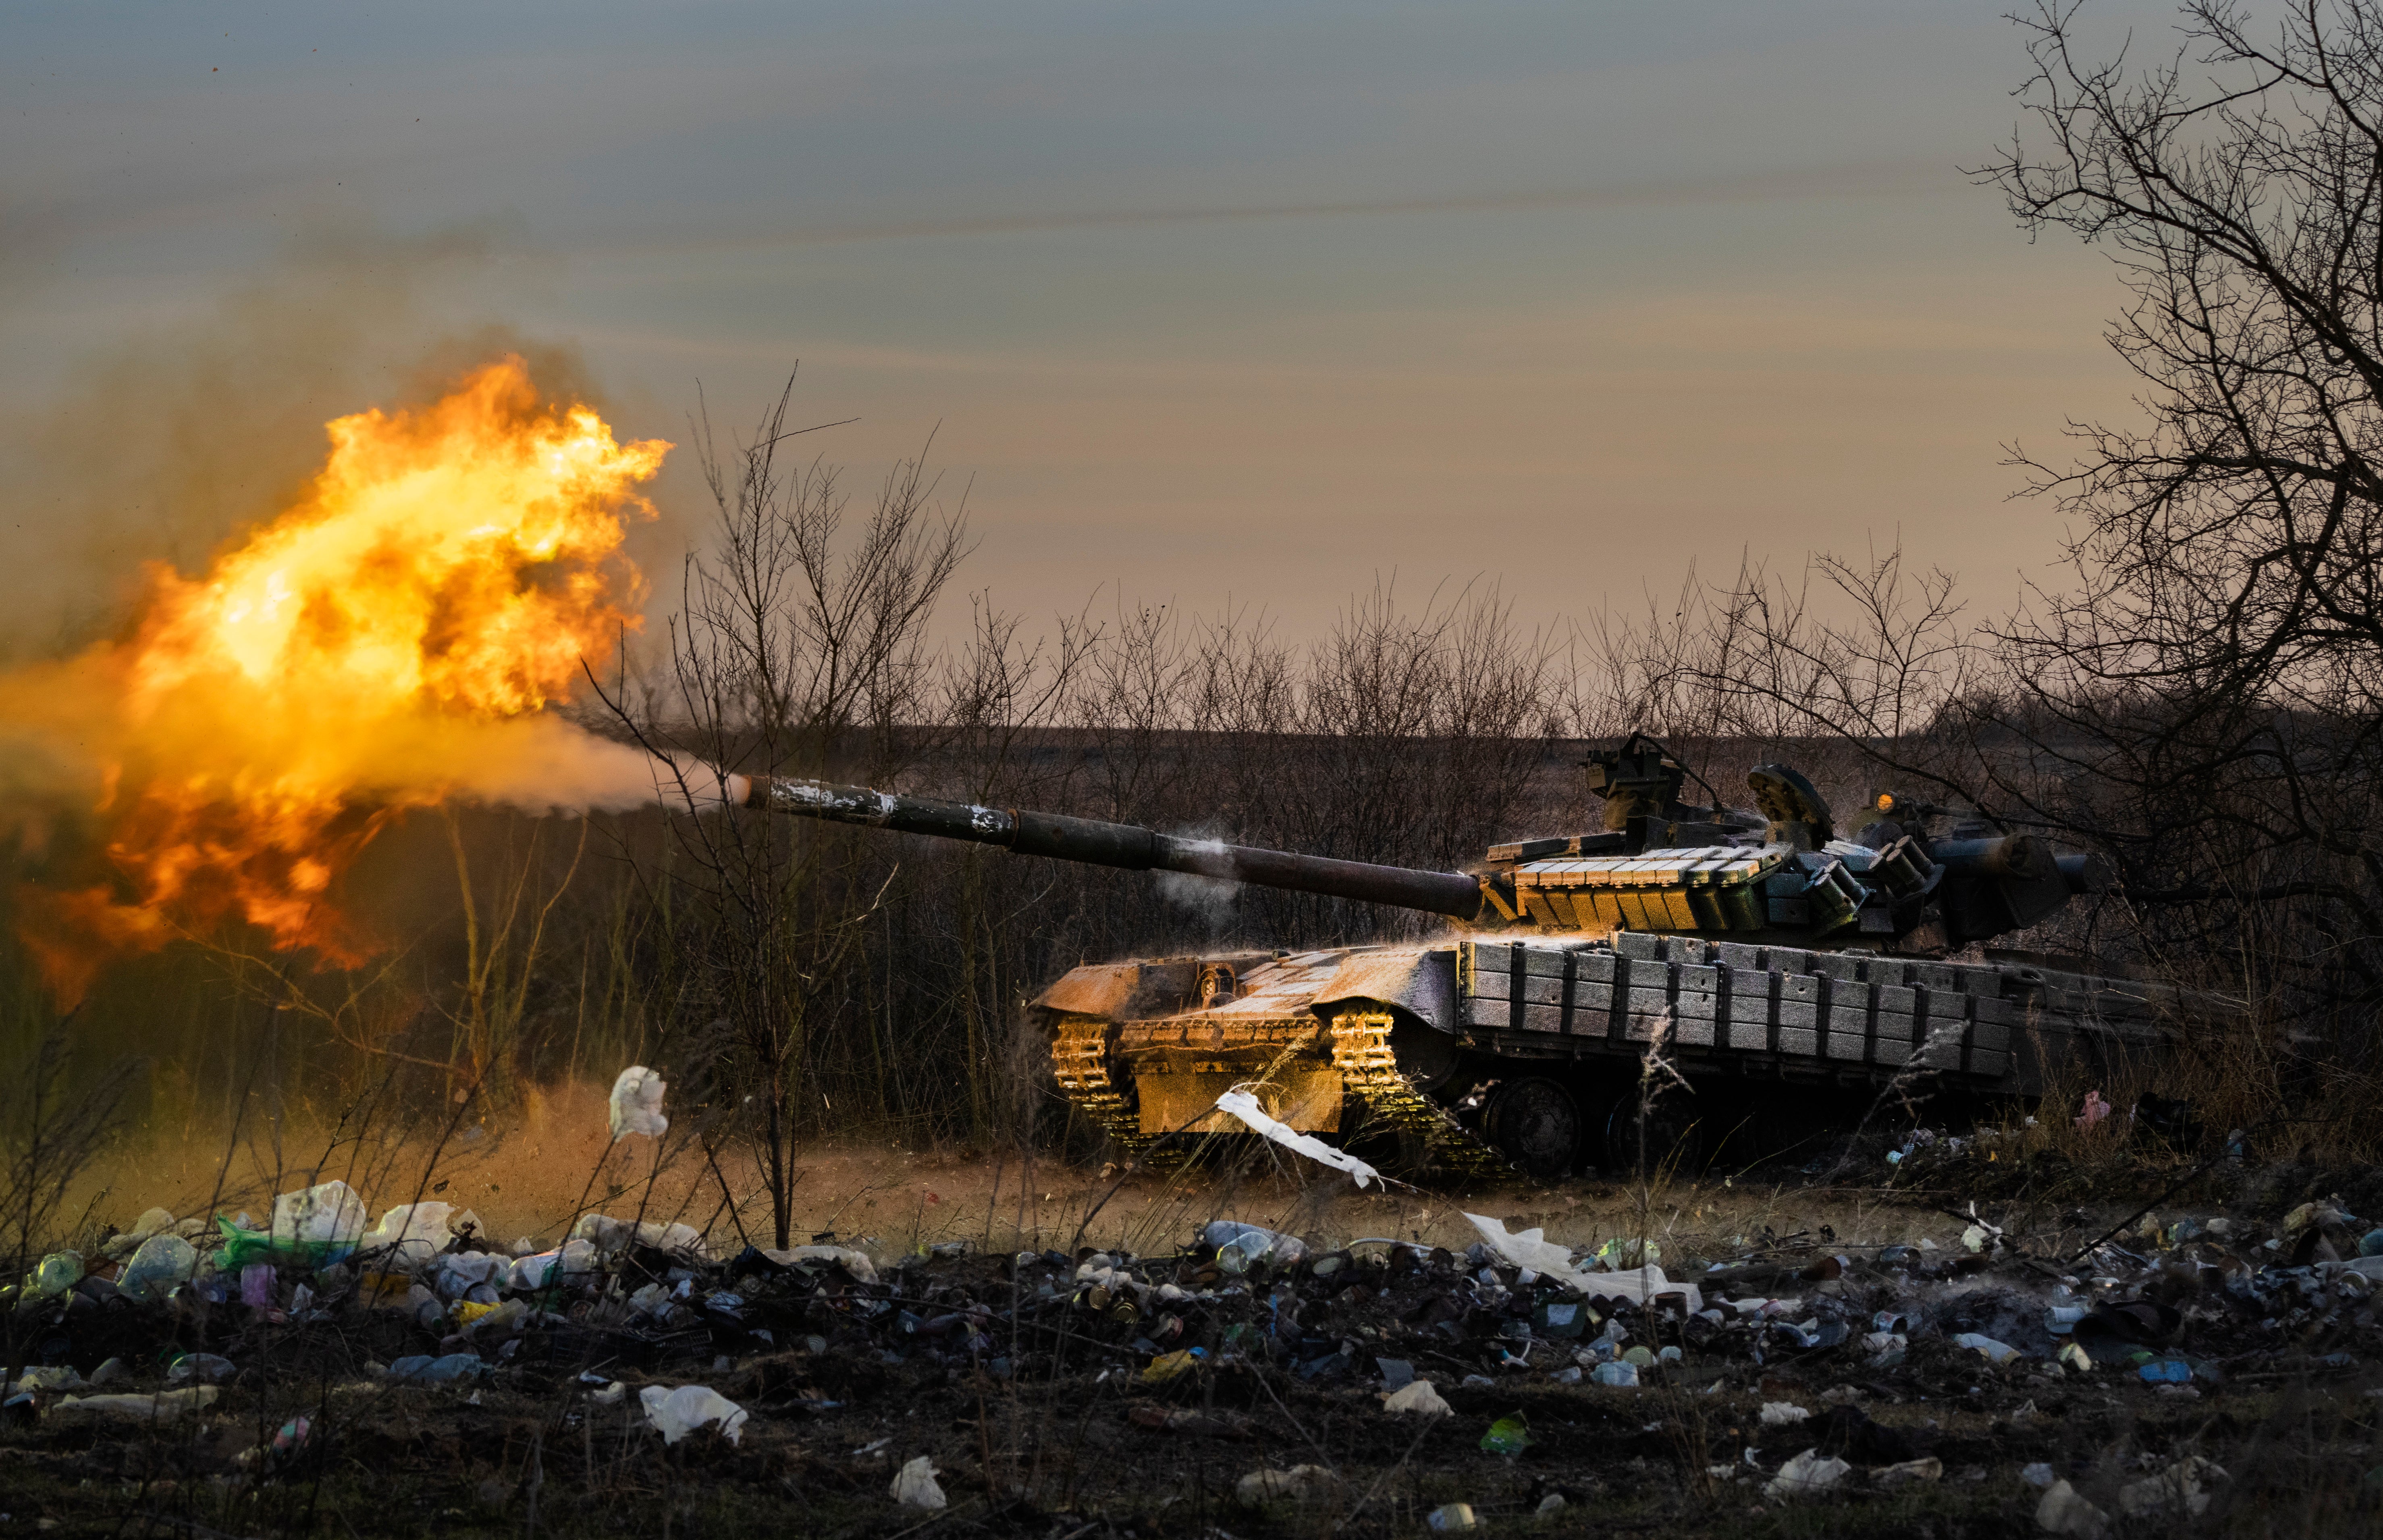 A Ukrainian tank of the 17th Tank Brigade fires at Russian positions in Chasiv Yar, the site of fierce battles with the Russian troops in the Donetsk region